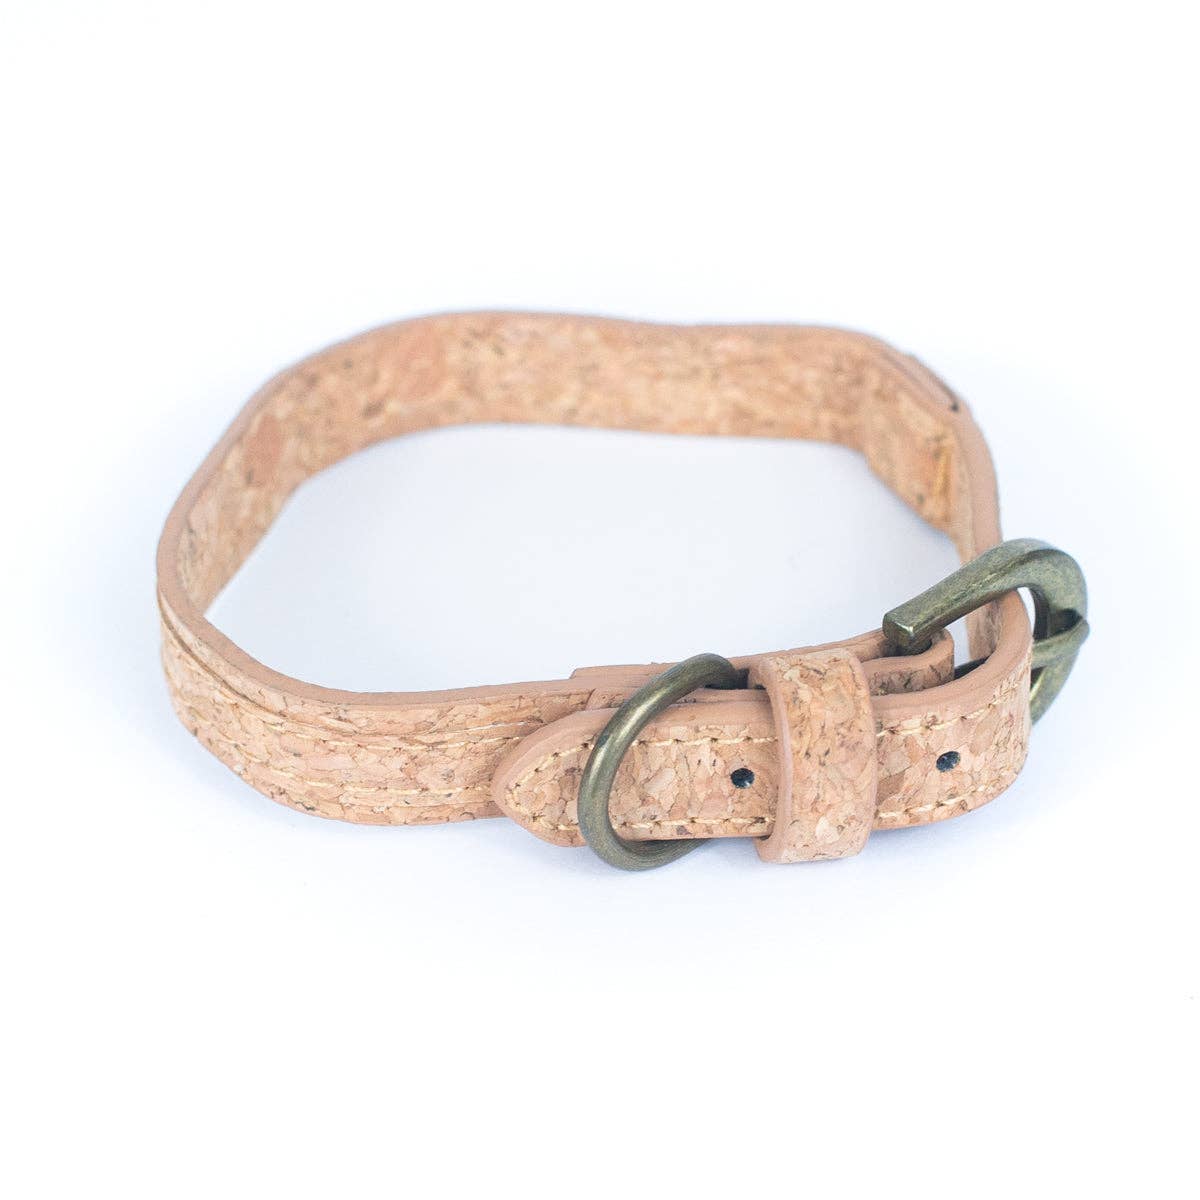 Naturally Corked Dog Leash and Collar Set - Fits23-29cm/ 9-1